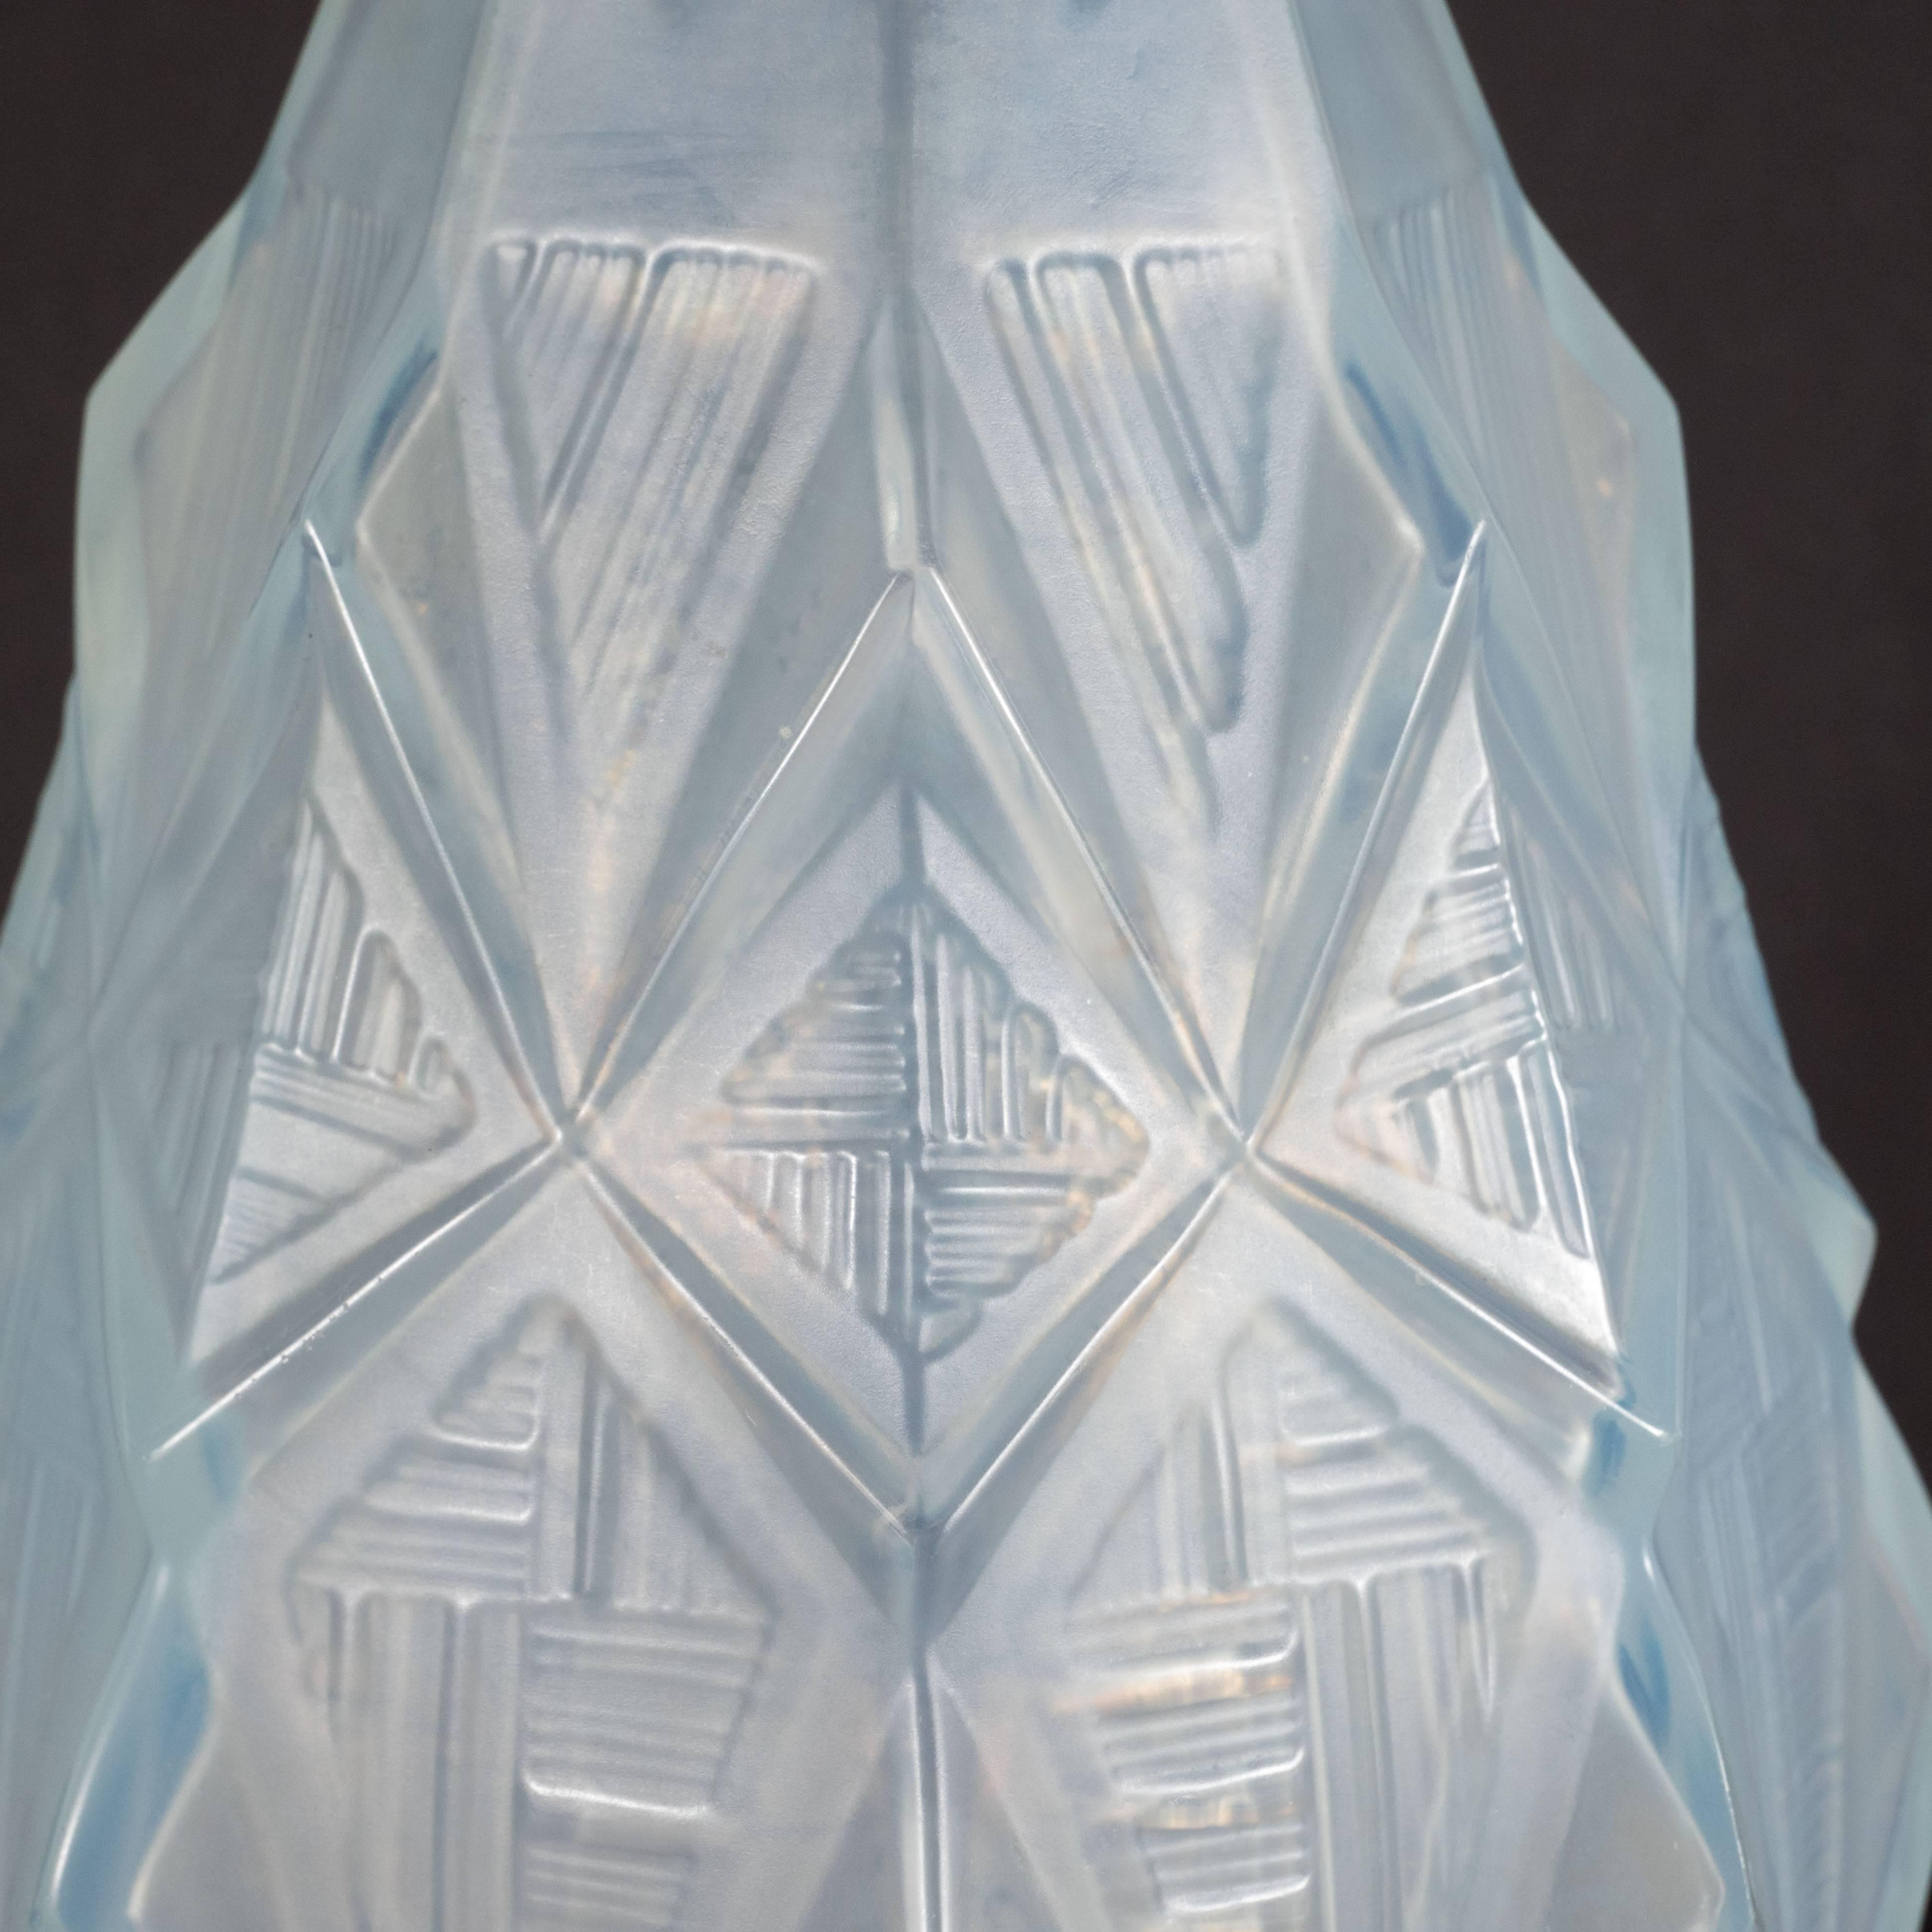 Mid-20th Century French Art Deco Opalescent Glass Vase with Raised Geometric Patterns by Sabino